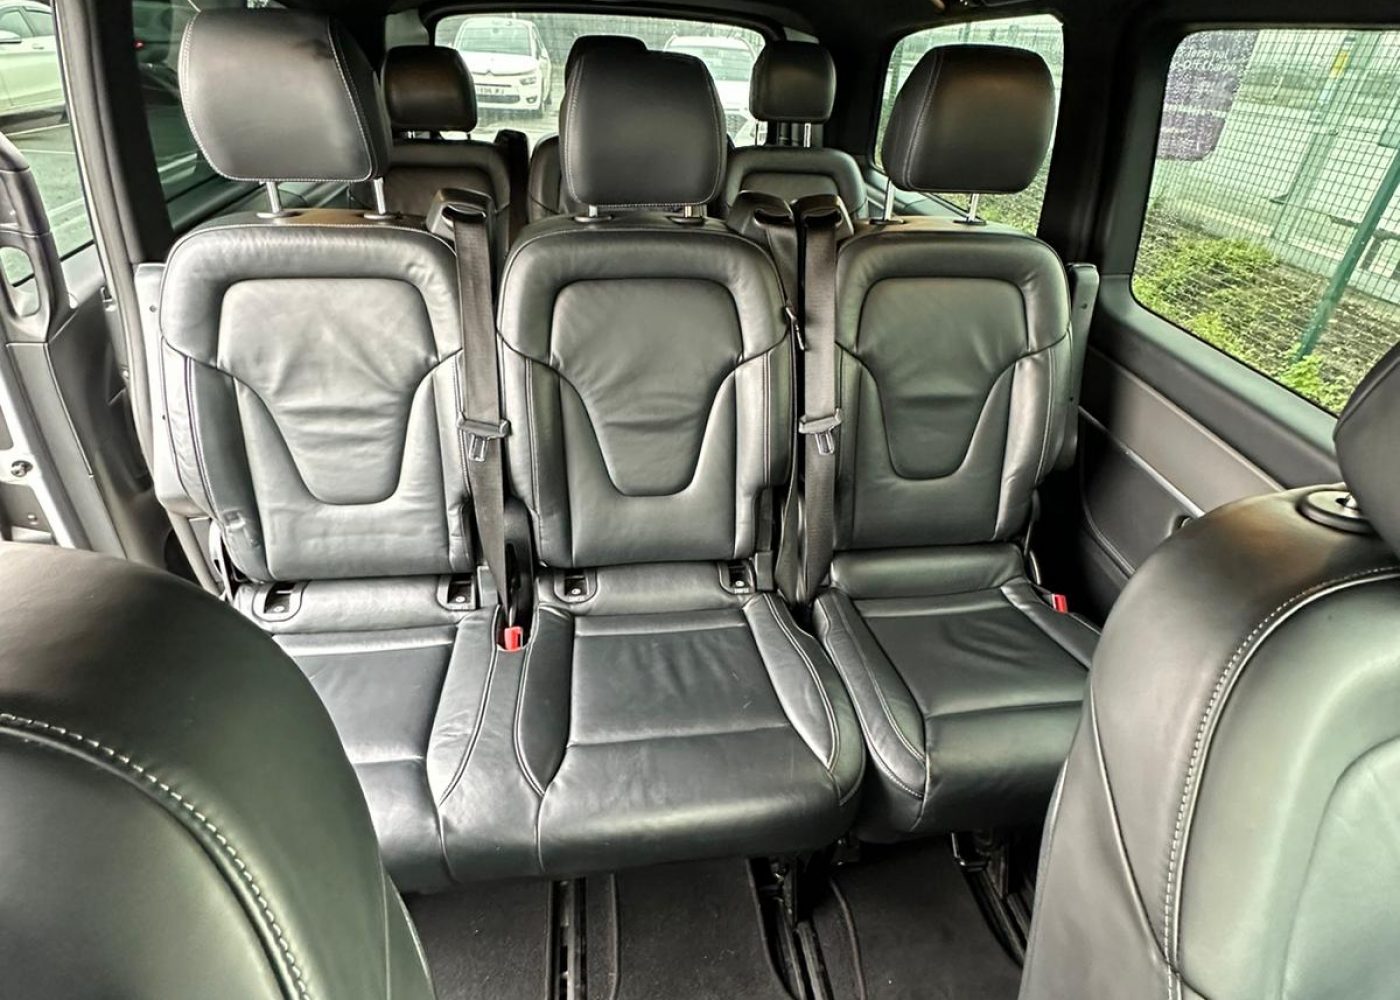 all seating facing forwards, V-class Mercedes